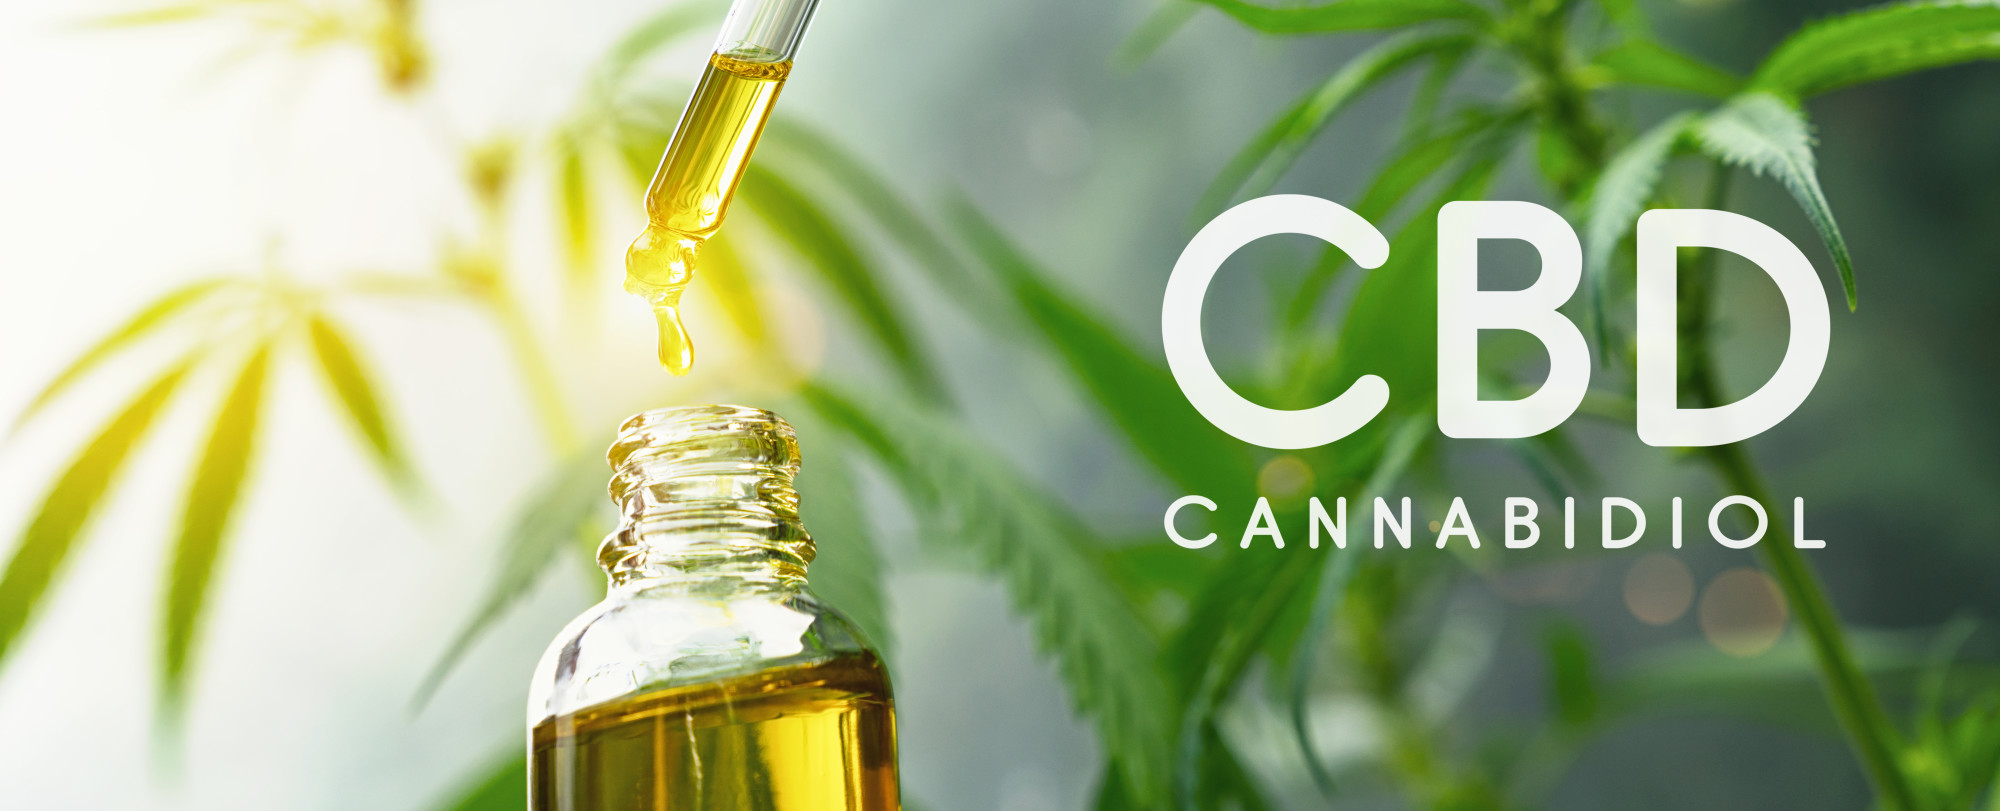 How to Sell CBD Oil as a Career